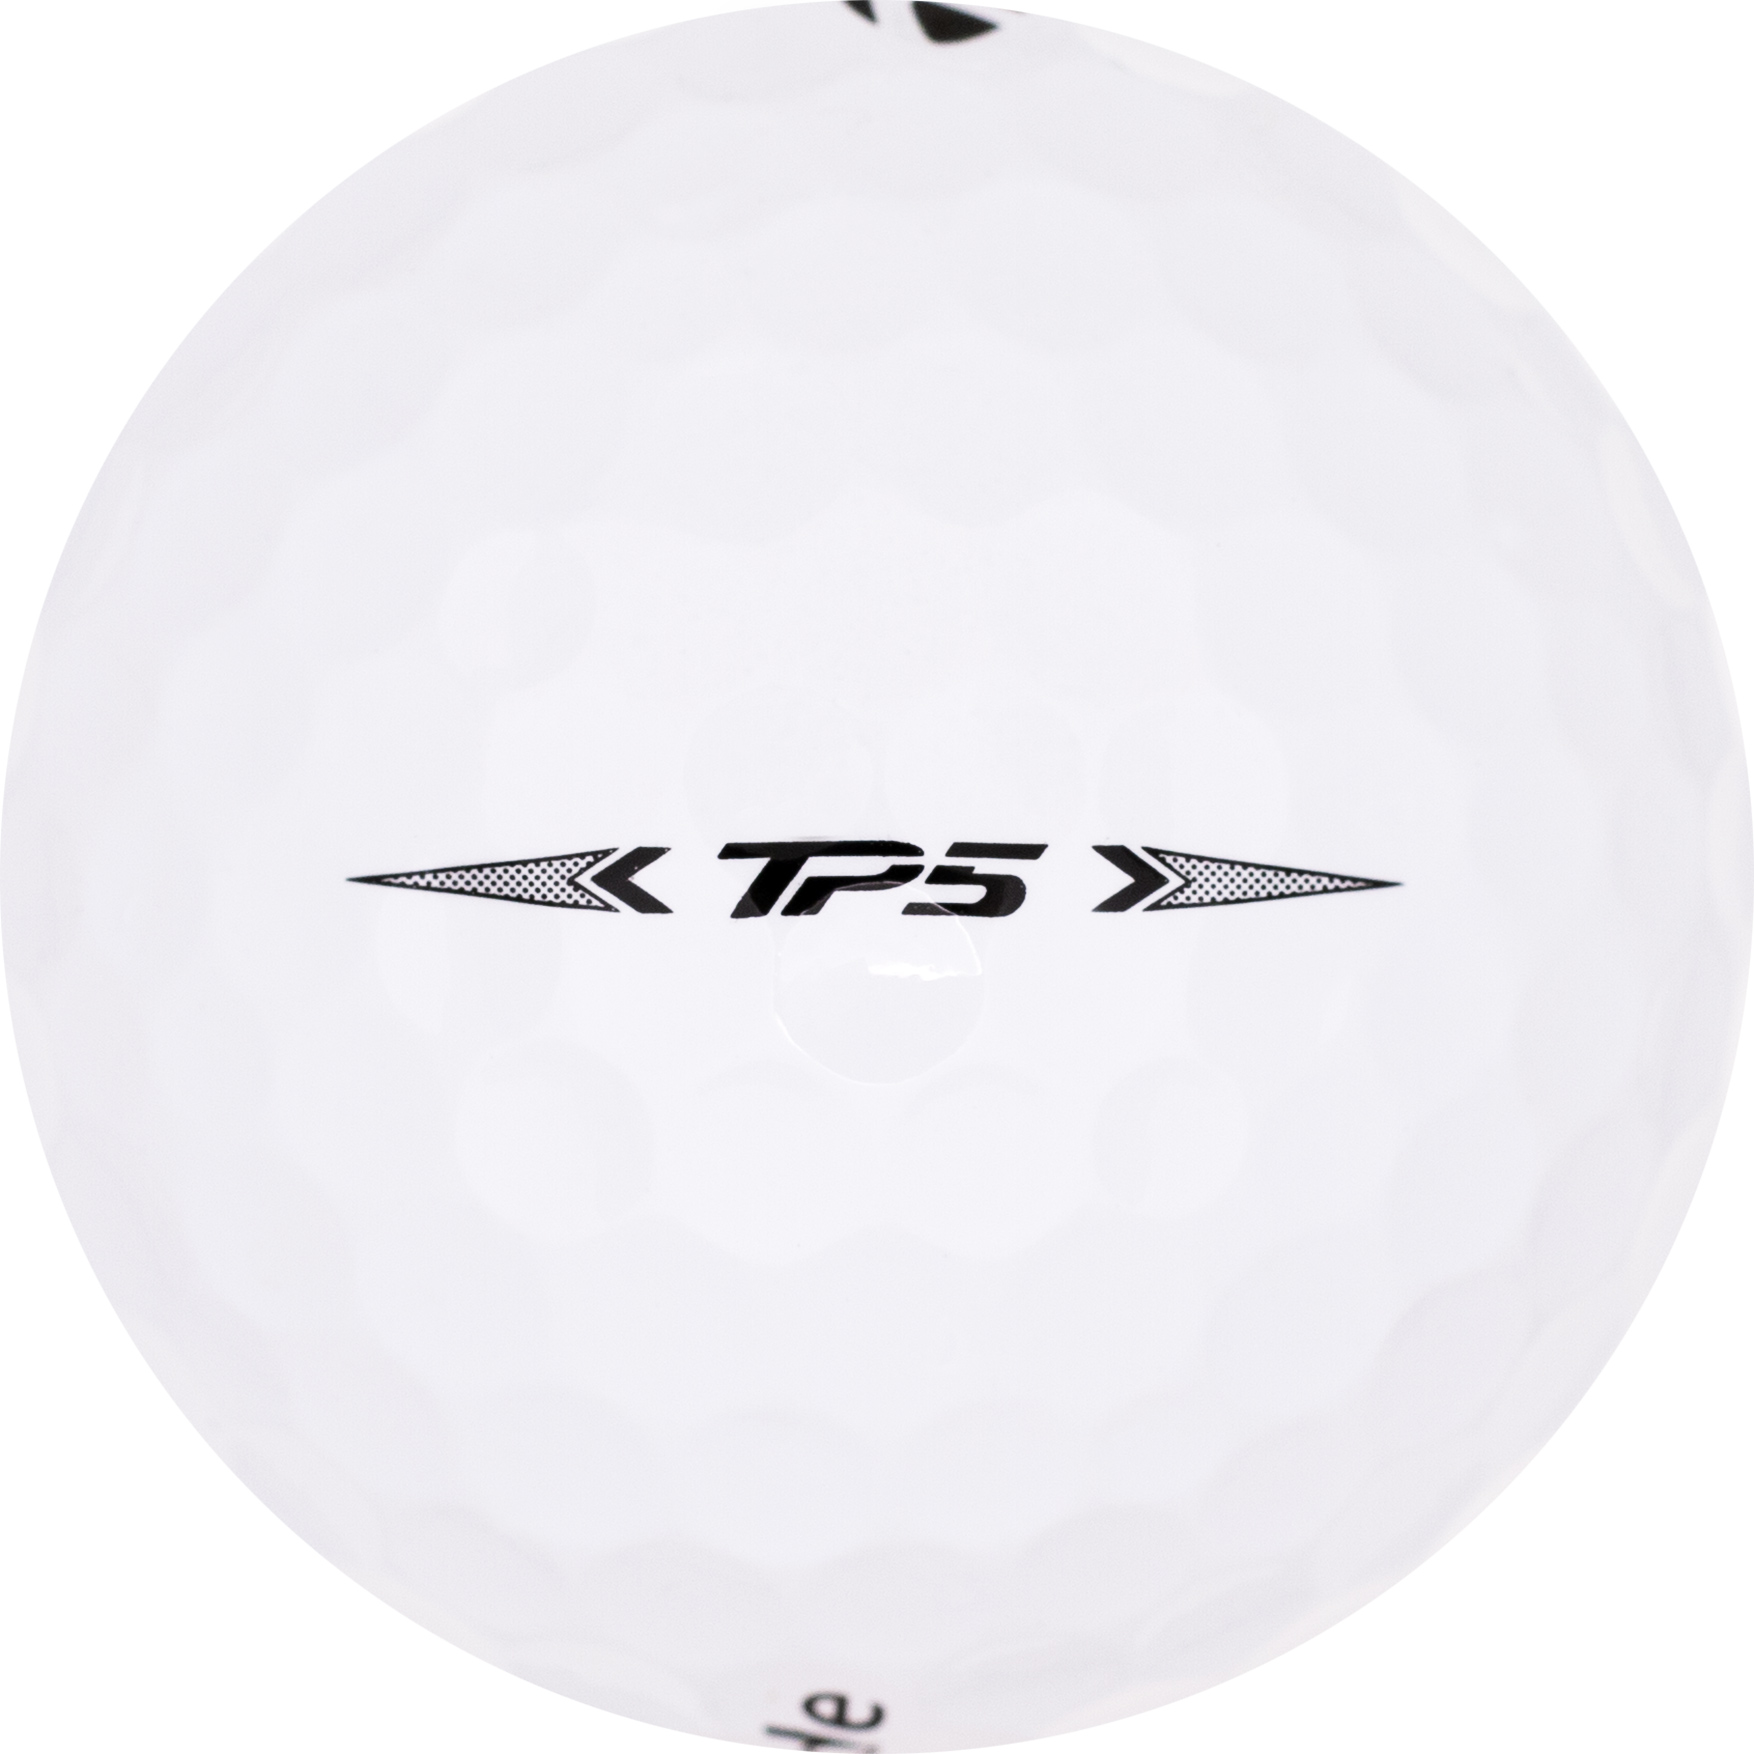 TaylorMade TP5 (2021)